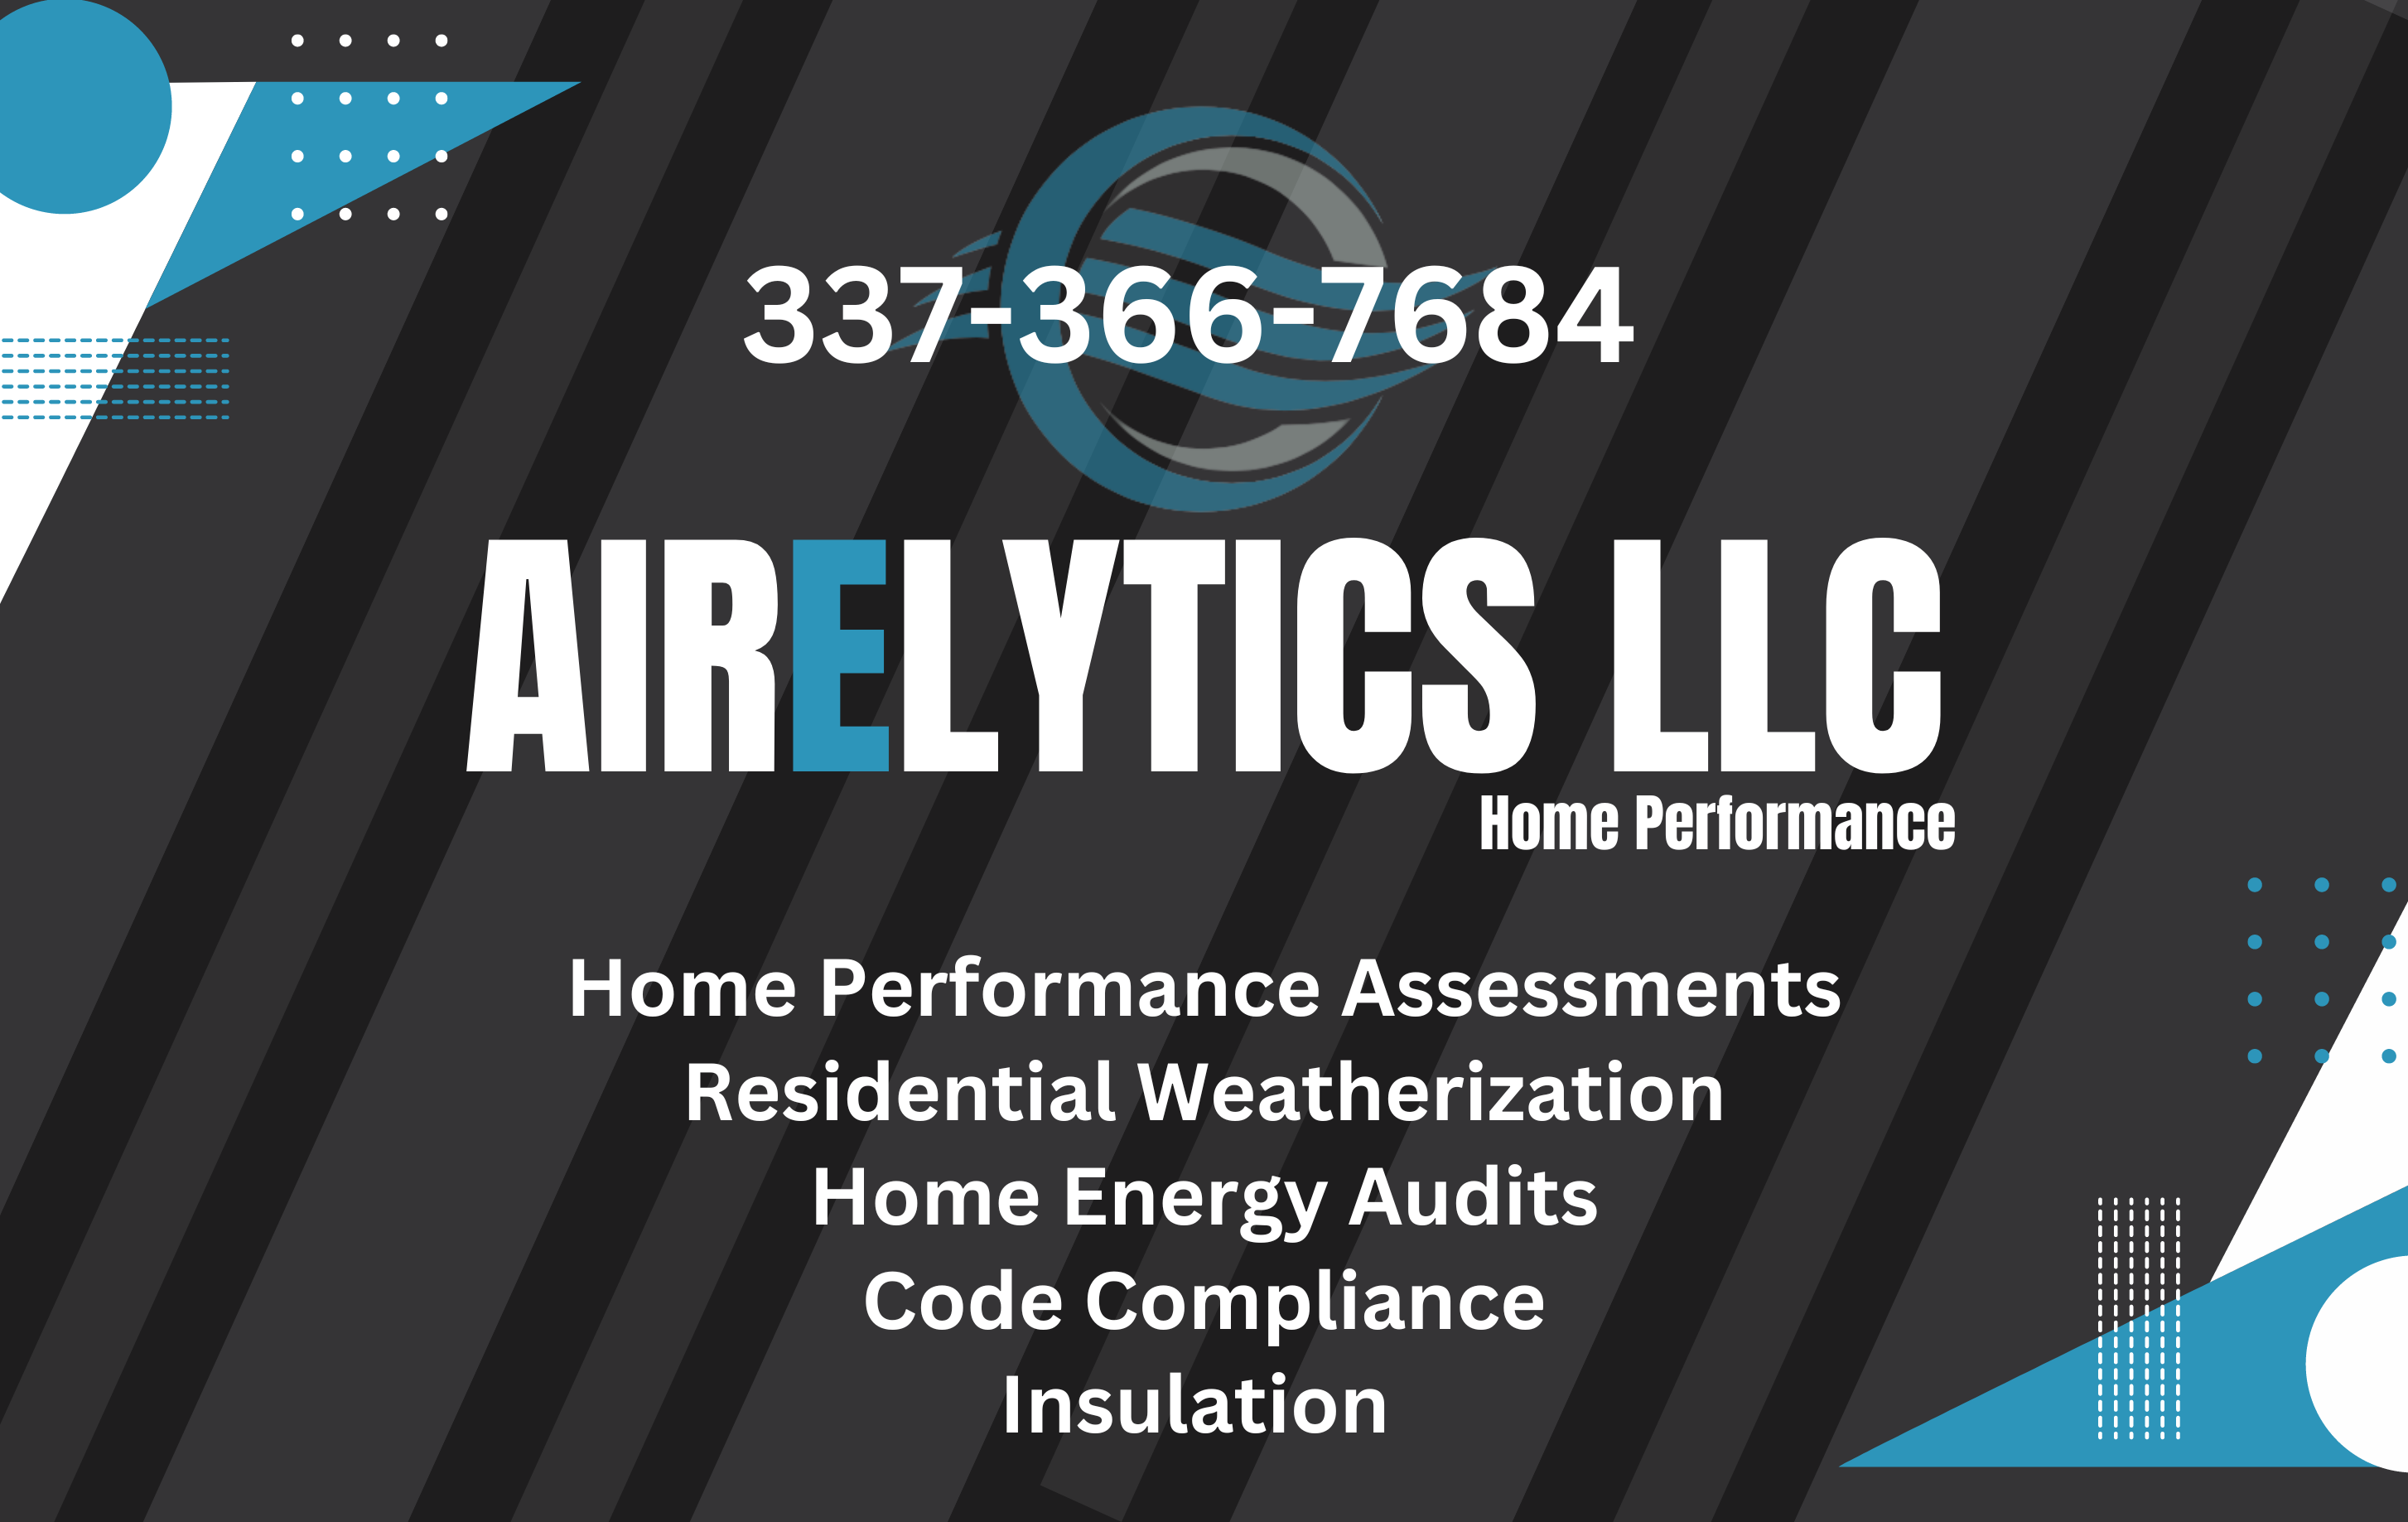 Airelytics LLC graphics with their services listed.